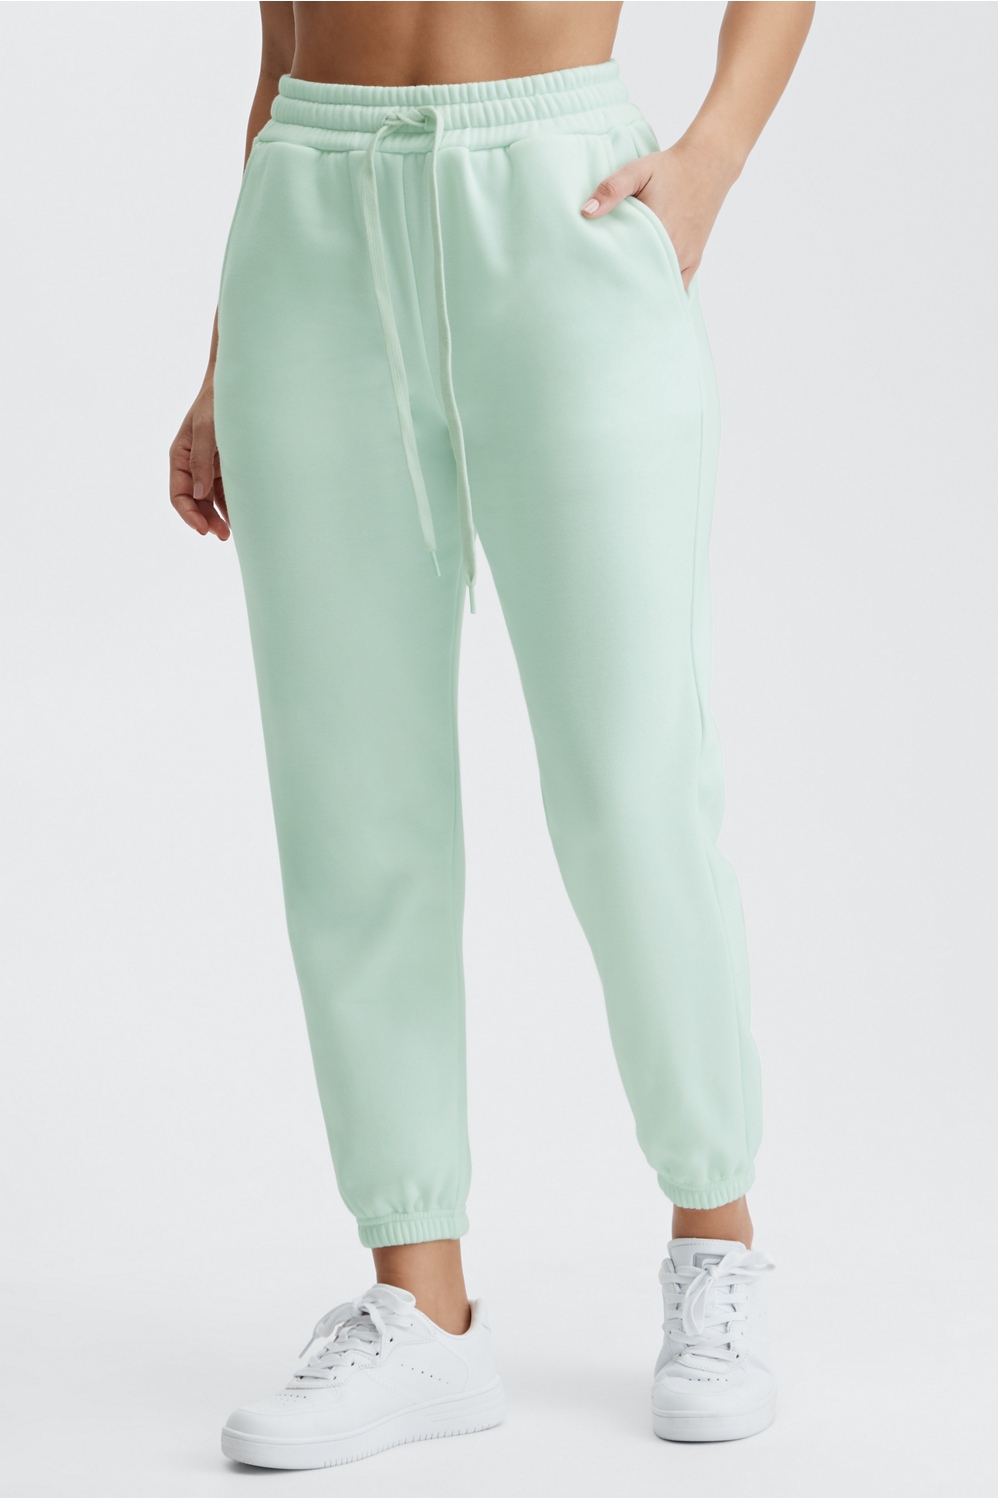 Ultra Soft Ladies Classic Sweatpants Frosted Mint